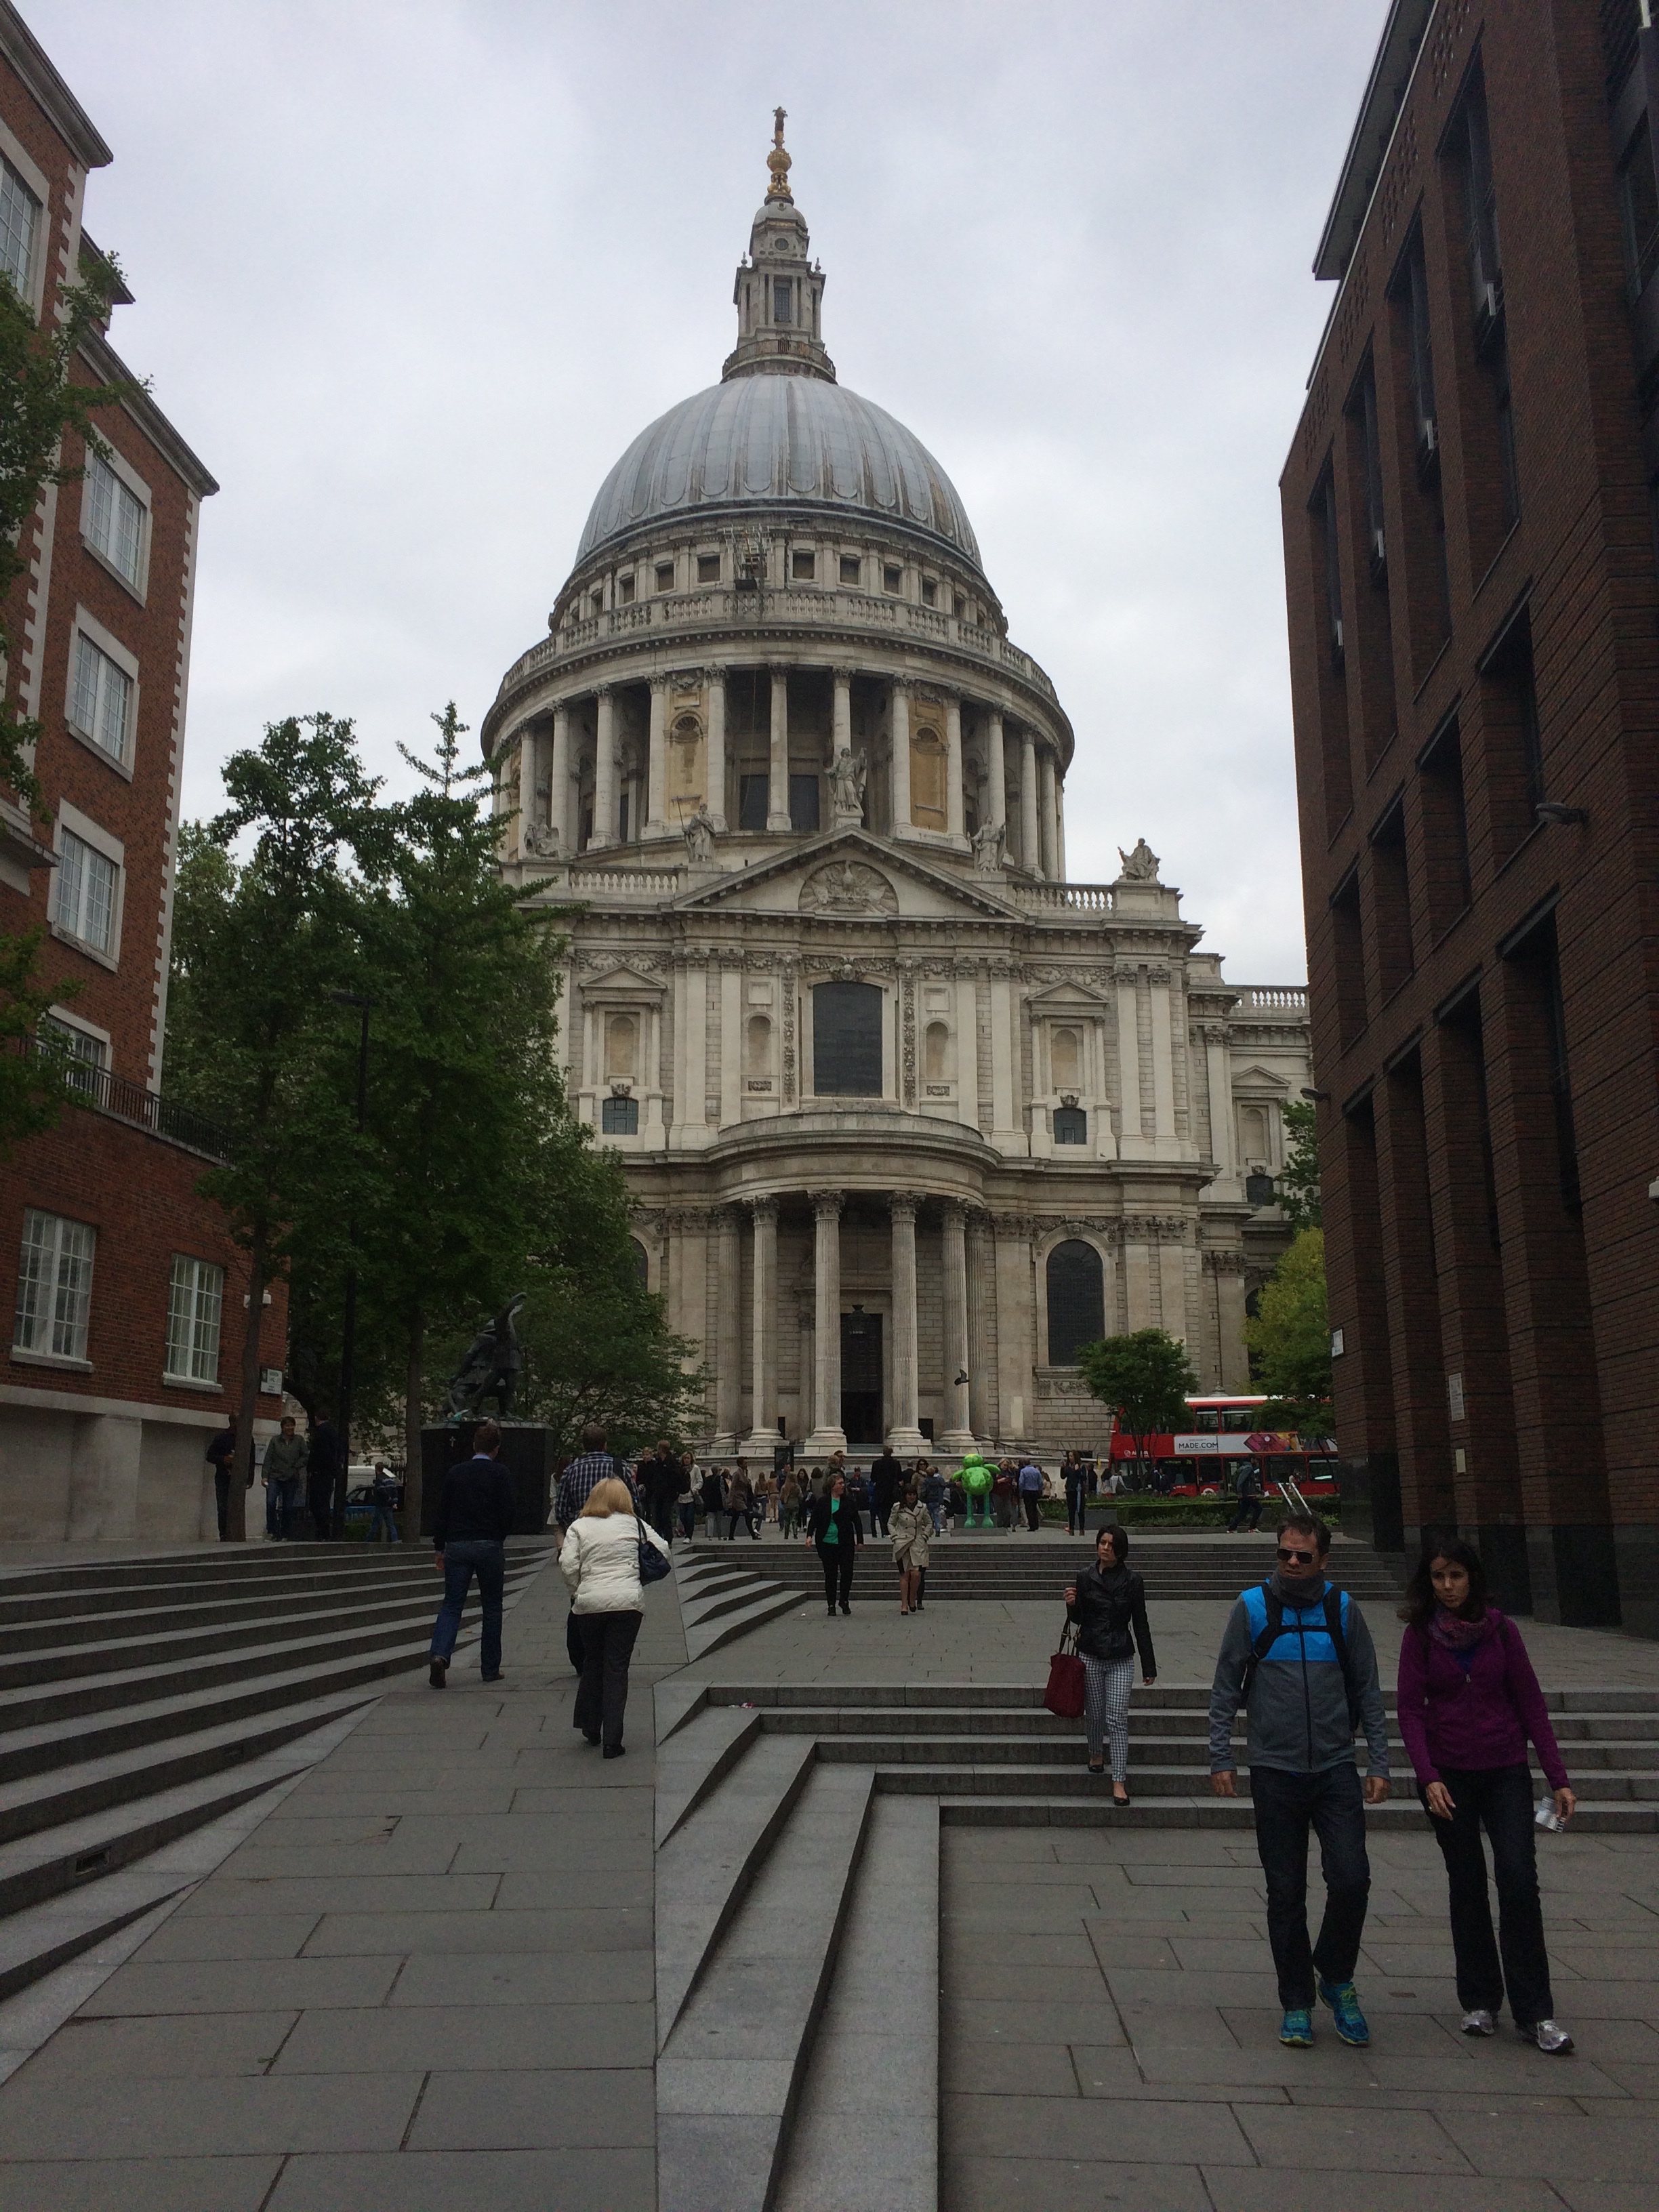 St. Paul's London | The Restless Worker